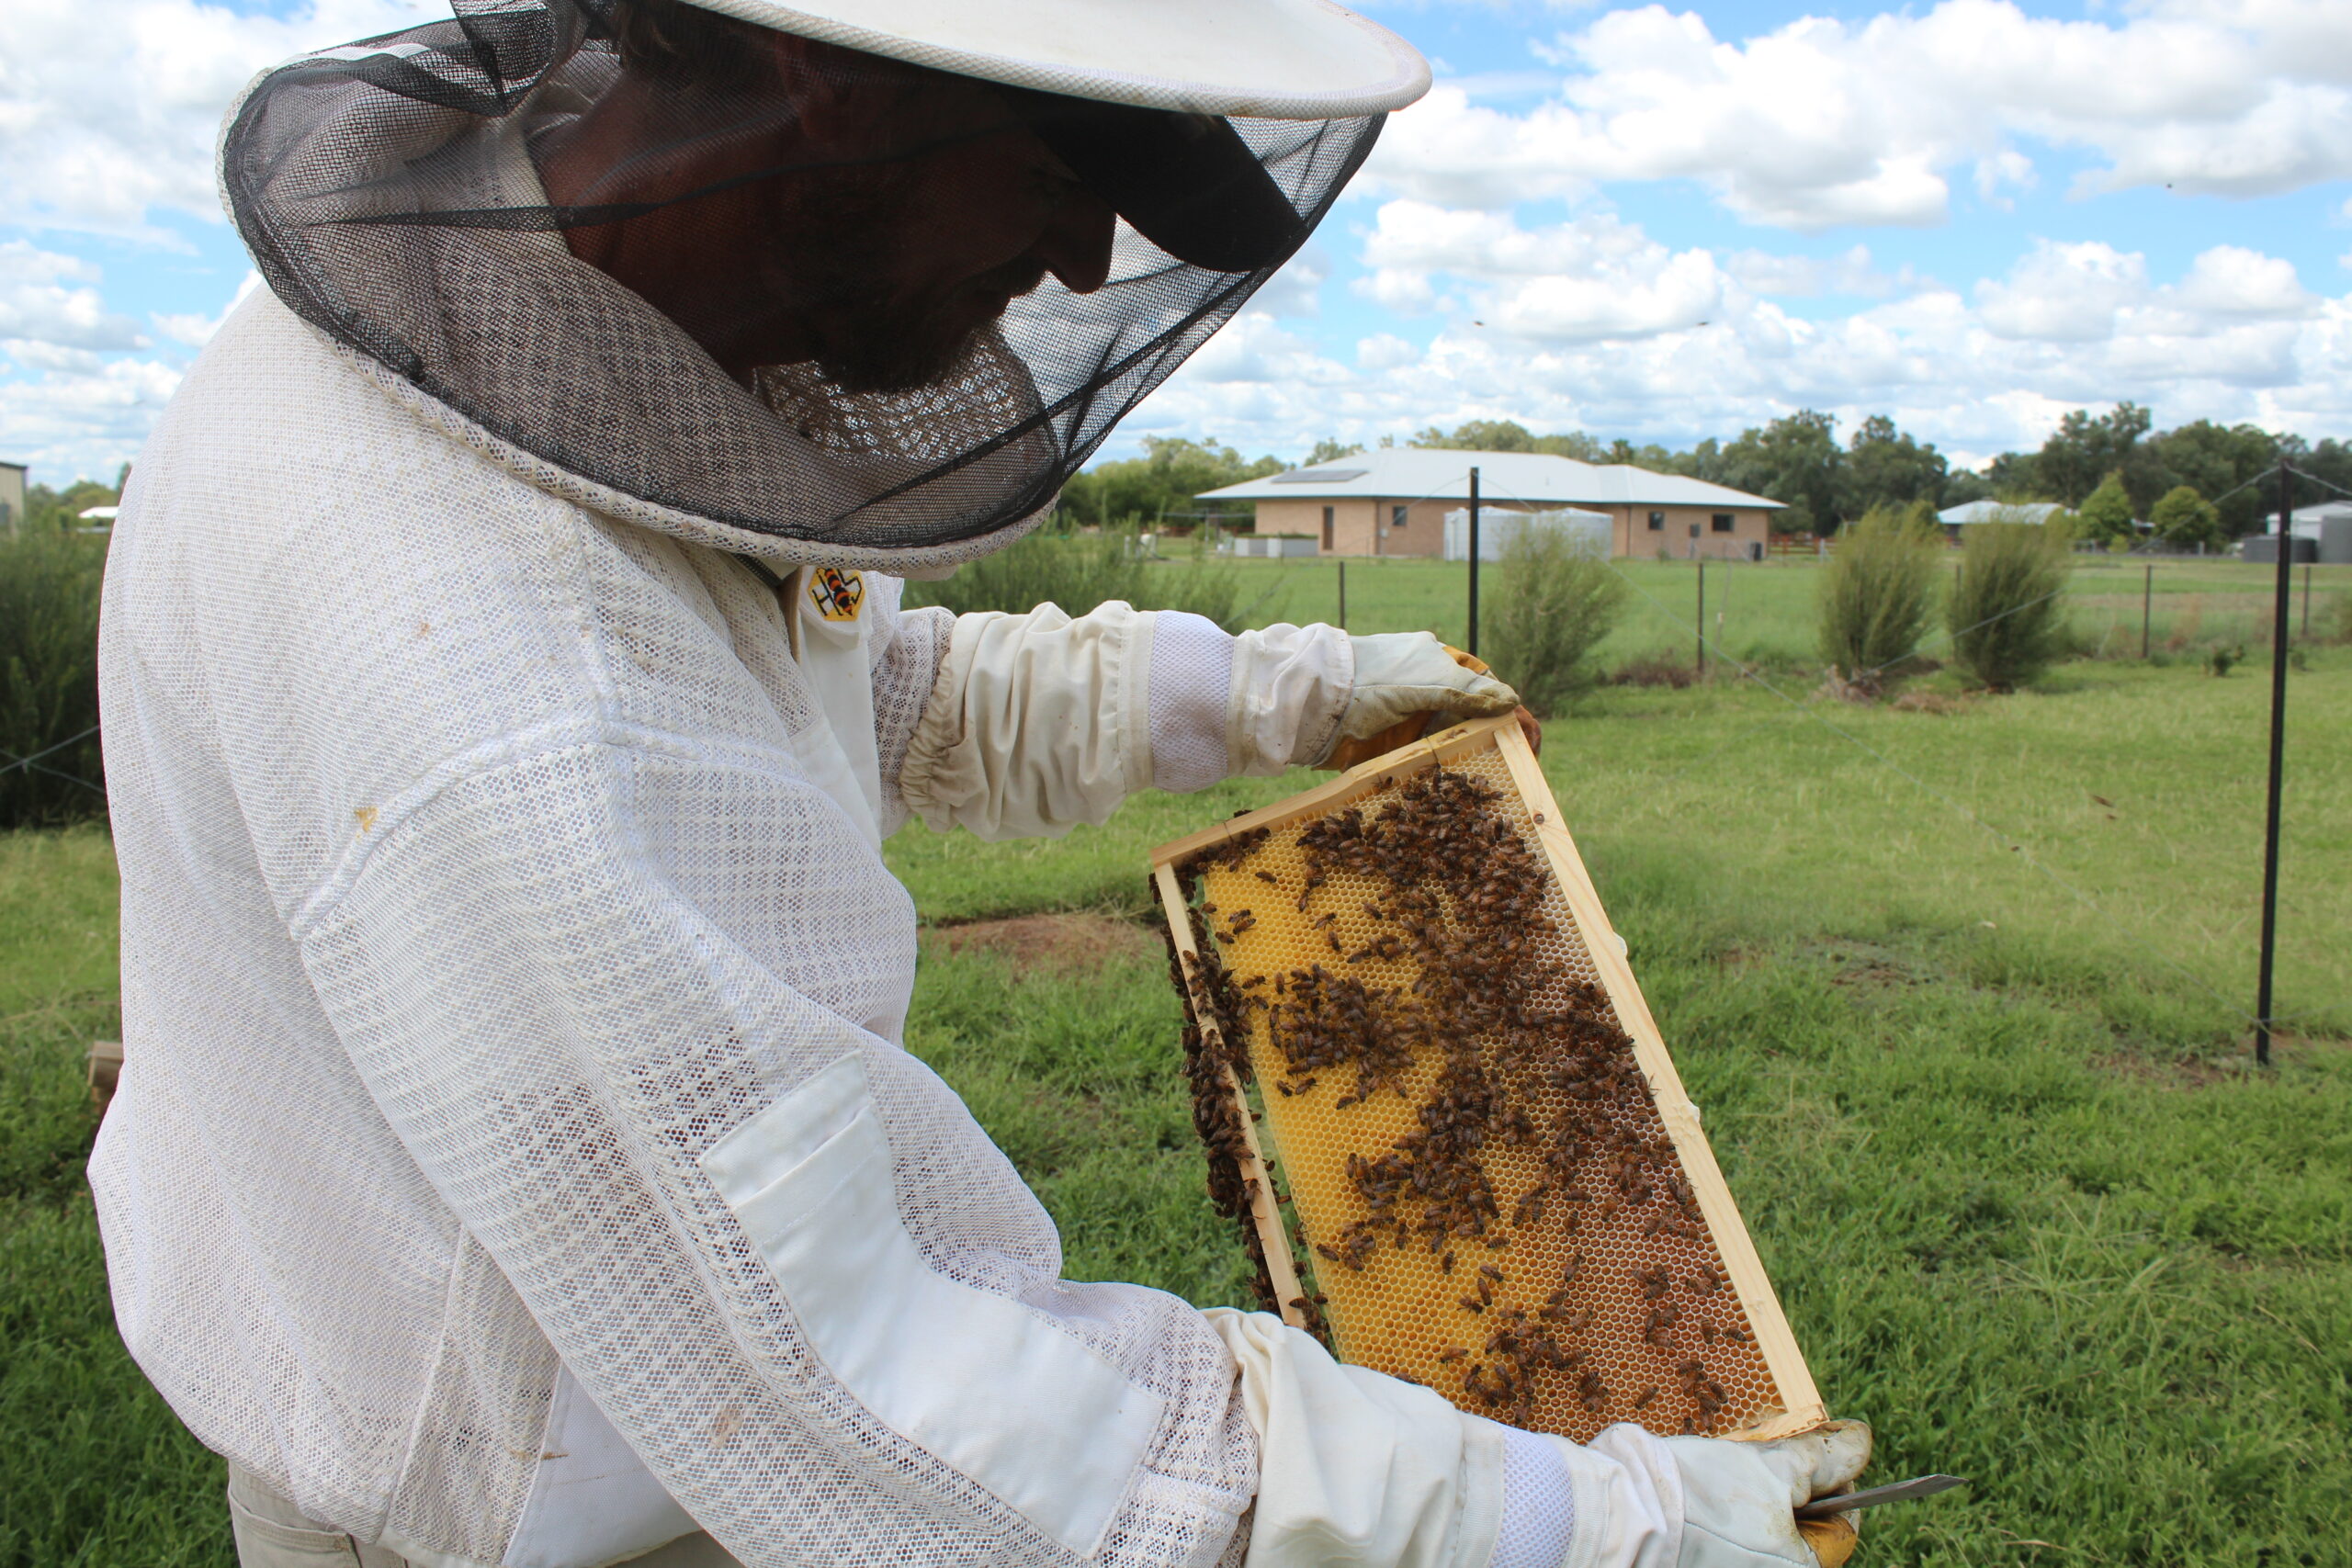 Local enthusiast Dan Mapstone shares the buzz on beekeeping